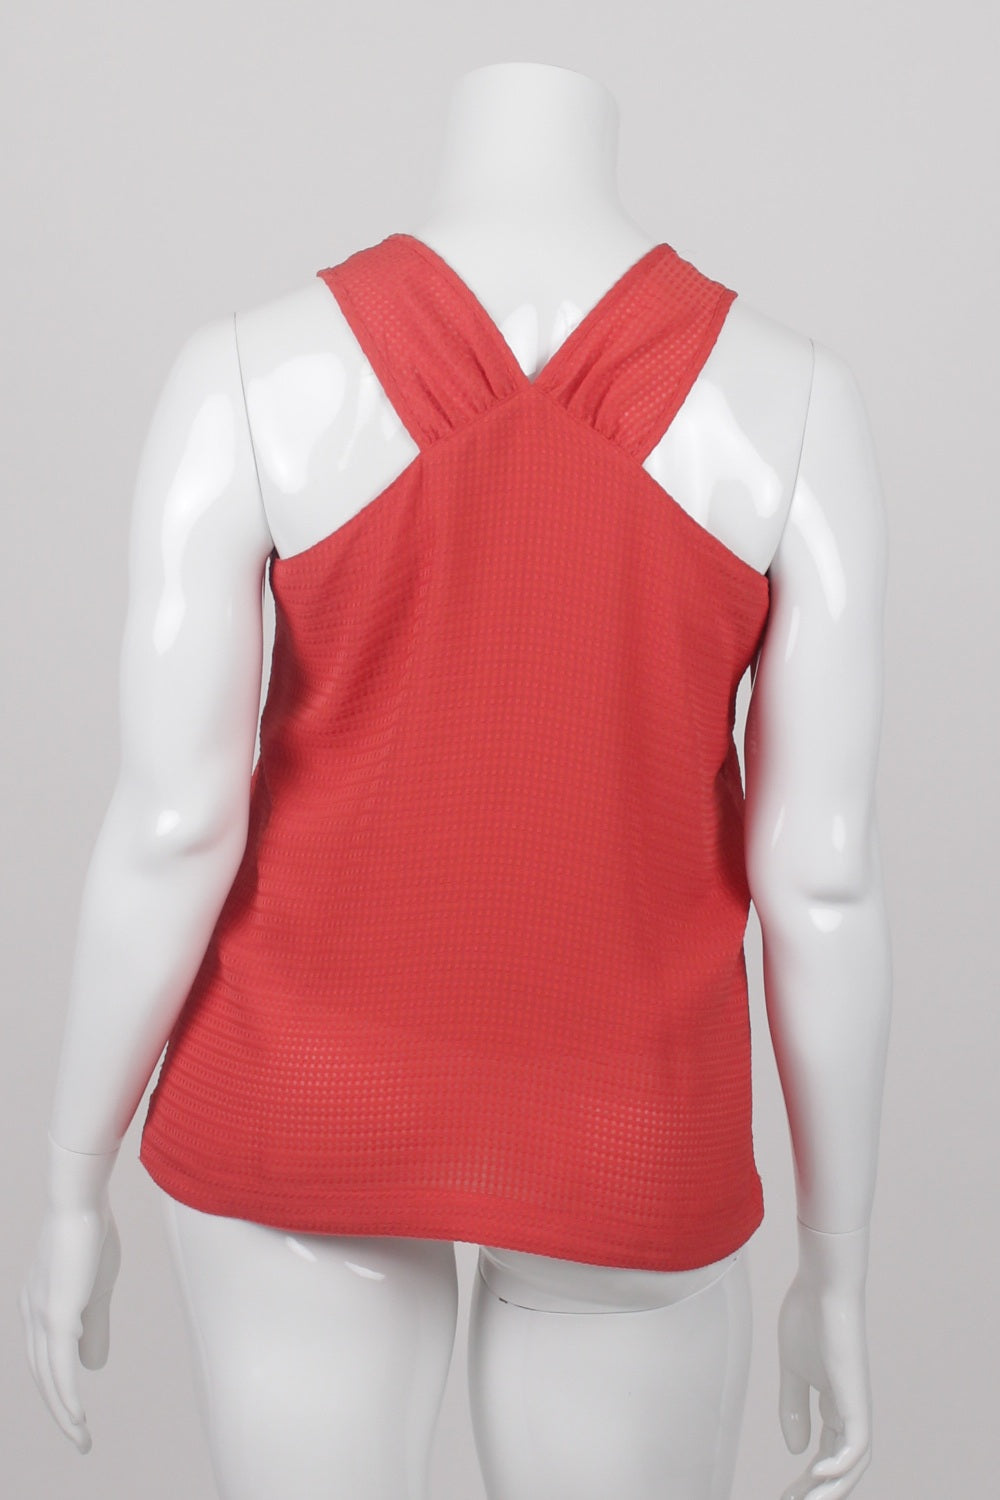 Jeanswest Red Textured Sleeveless Top 14